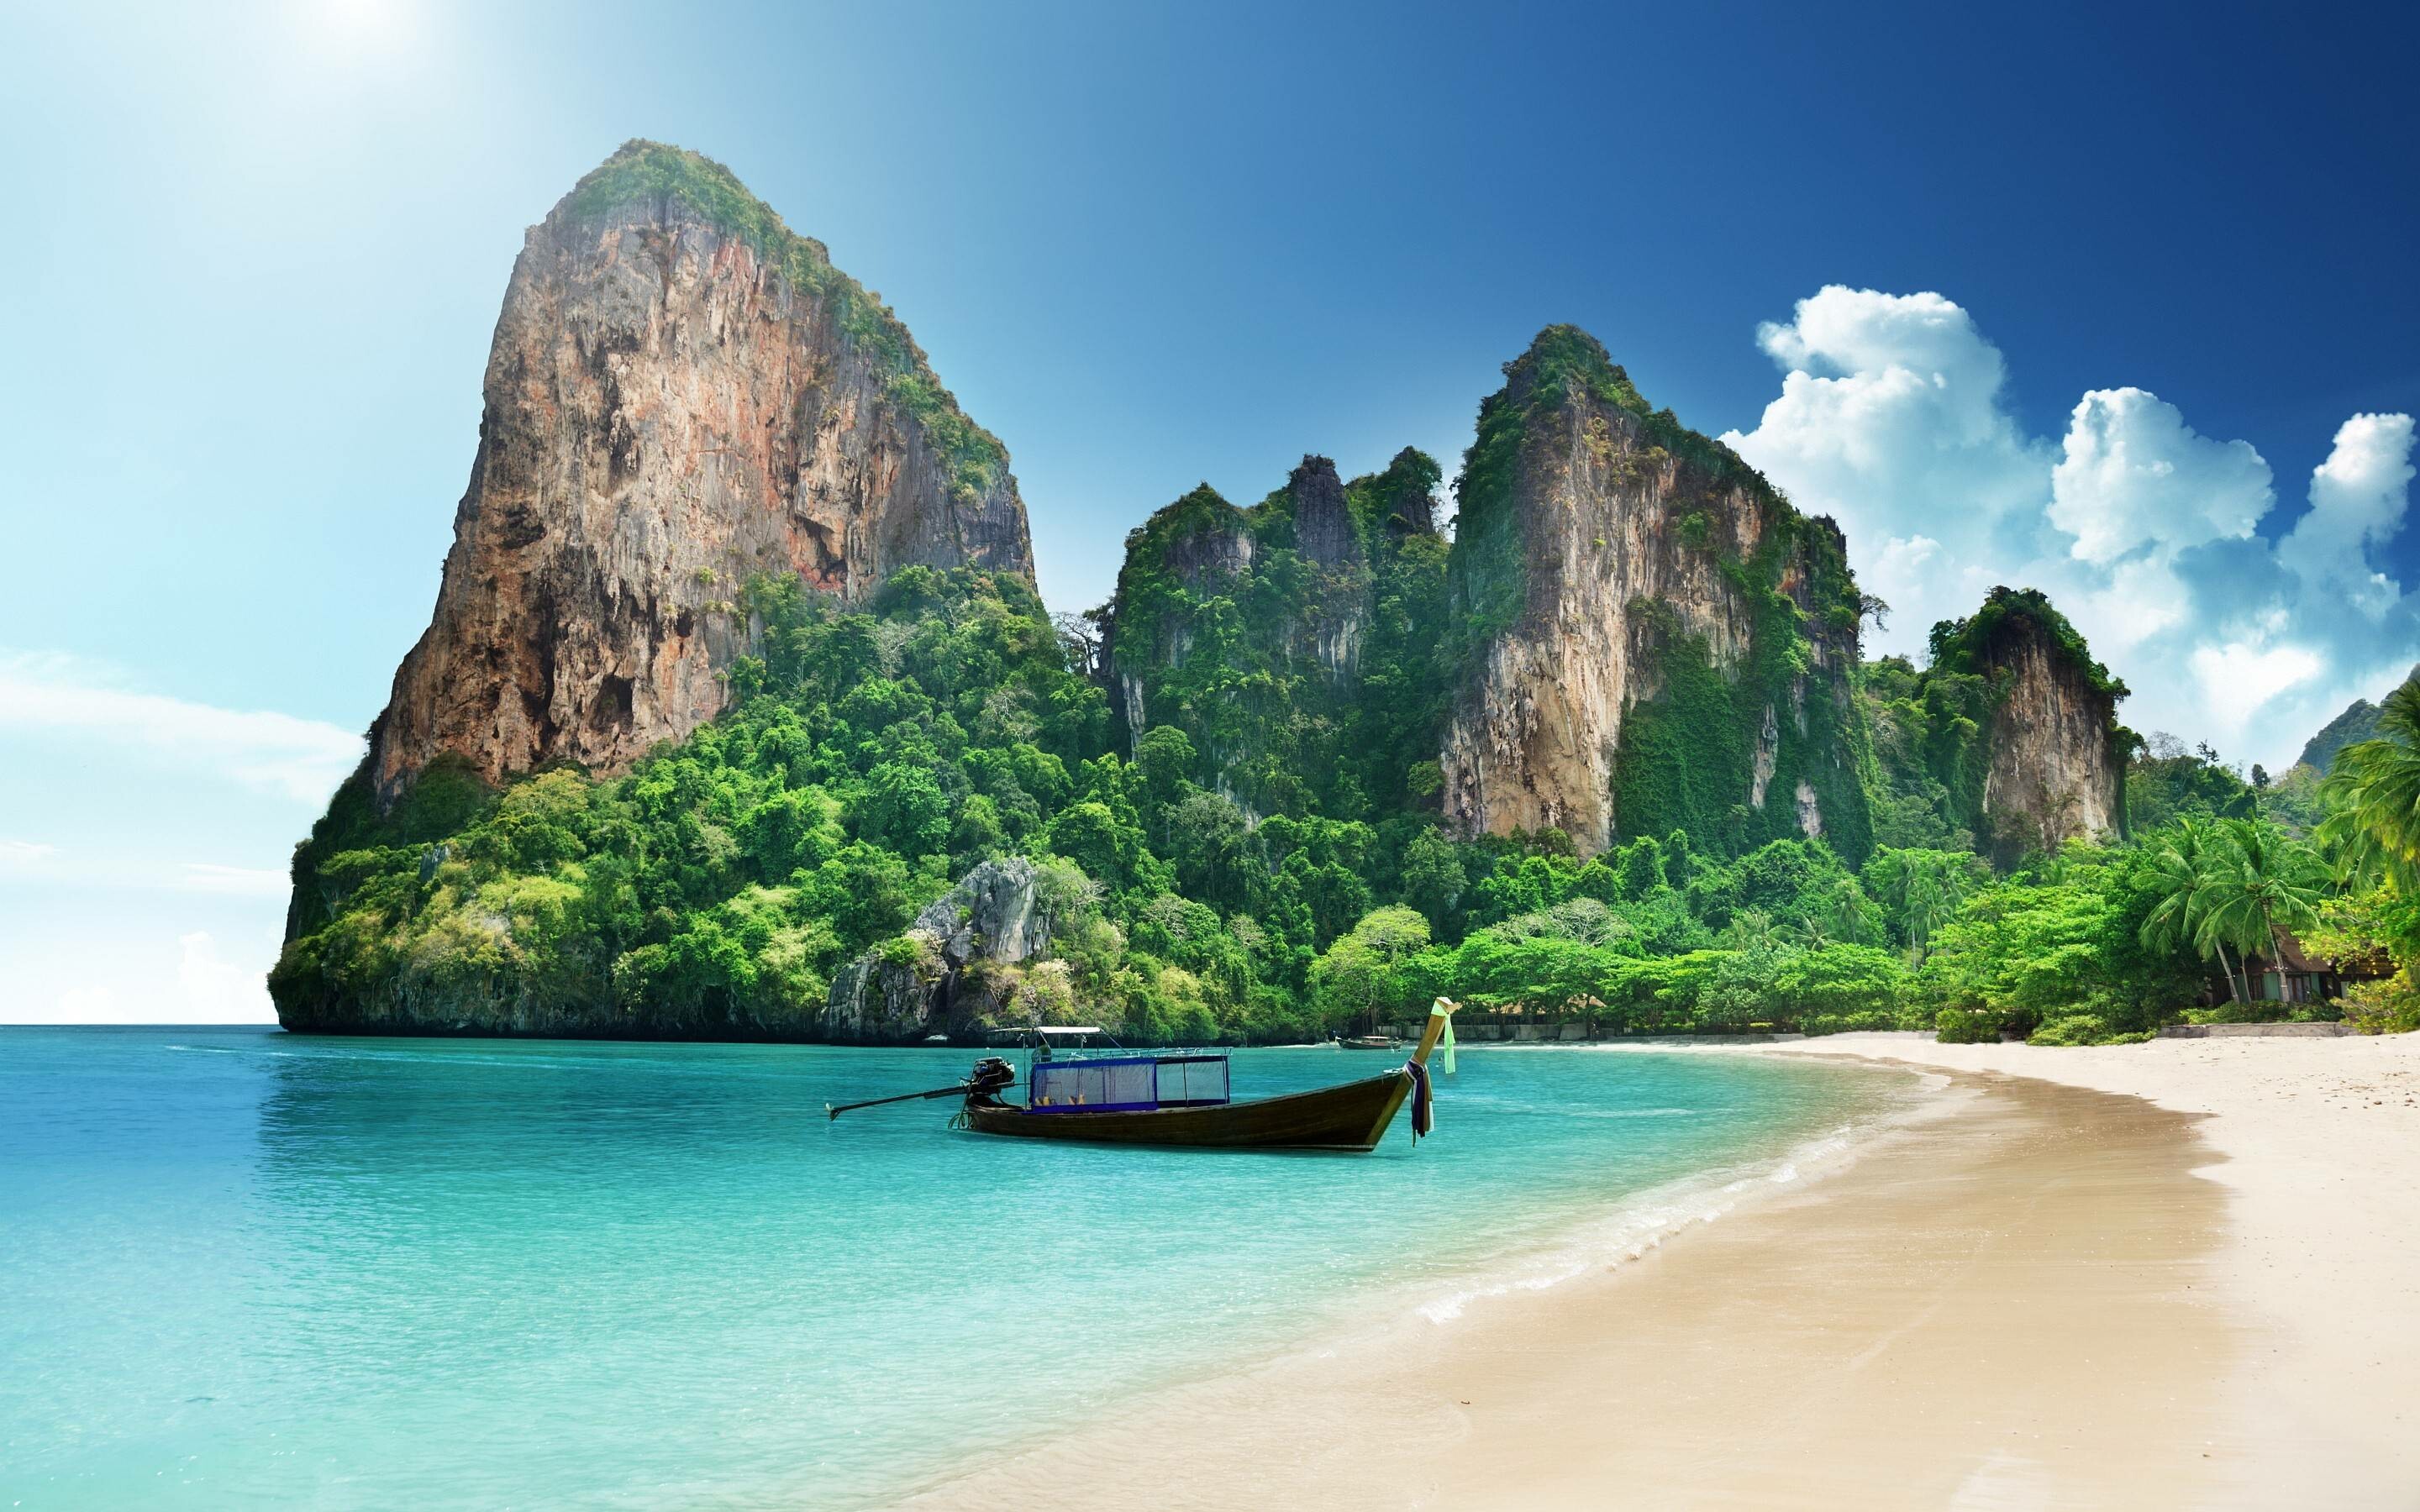 Thailand: The country joined the Southeast Asia Treaty Organization (SEATO) in 1954. 2880x1800 HD Wallpaper.